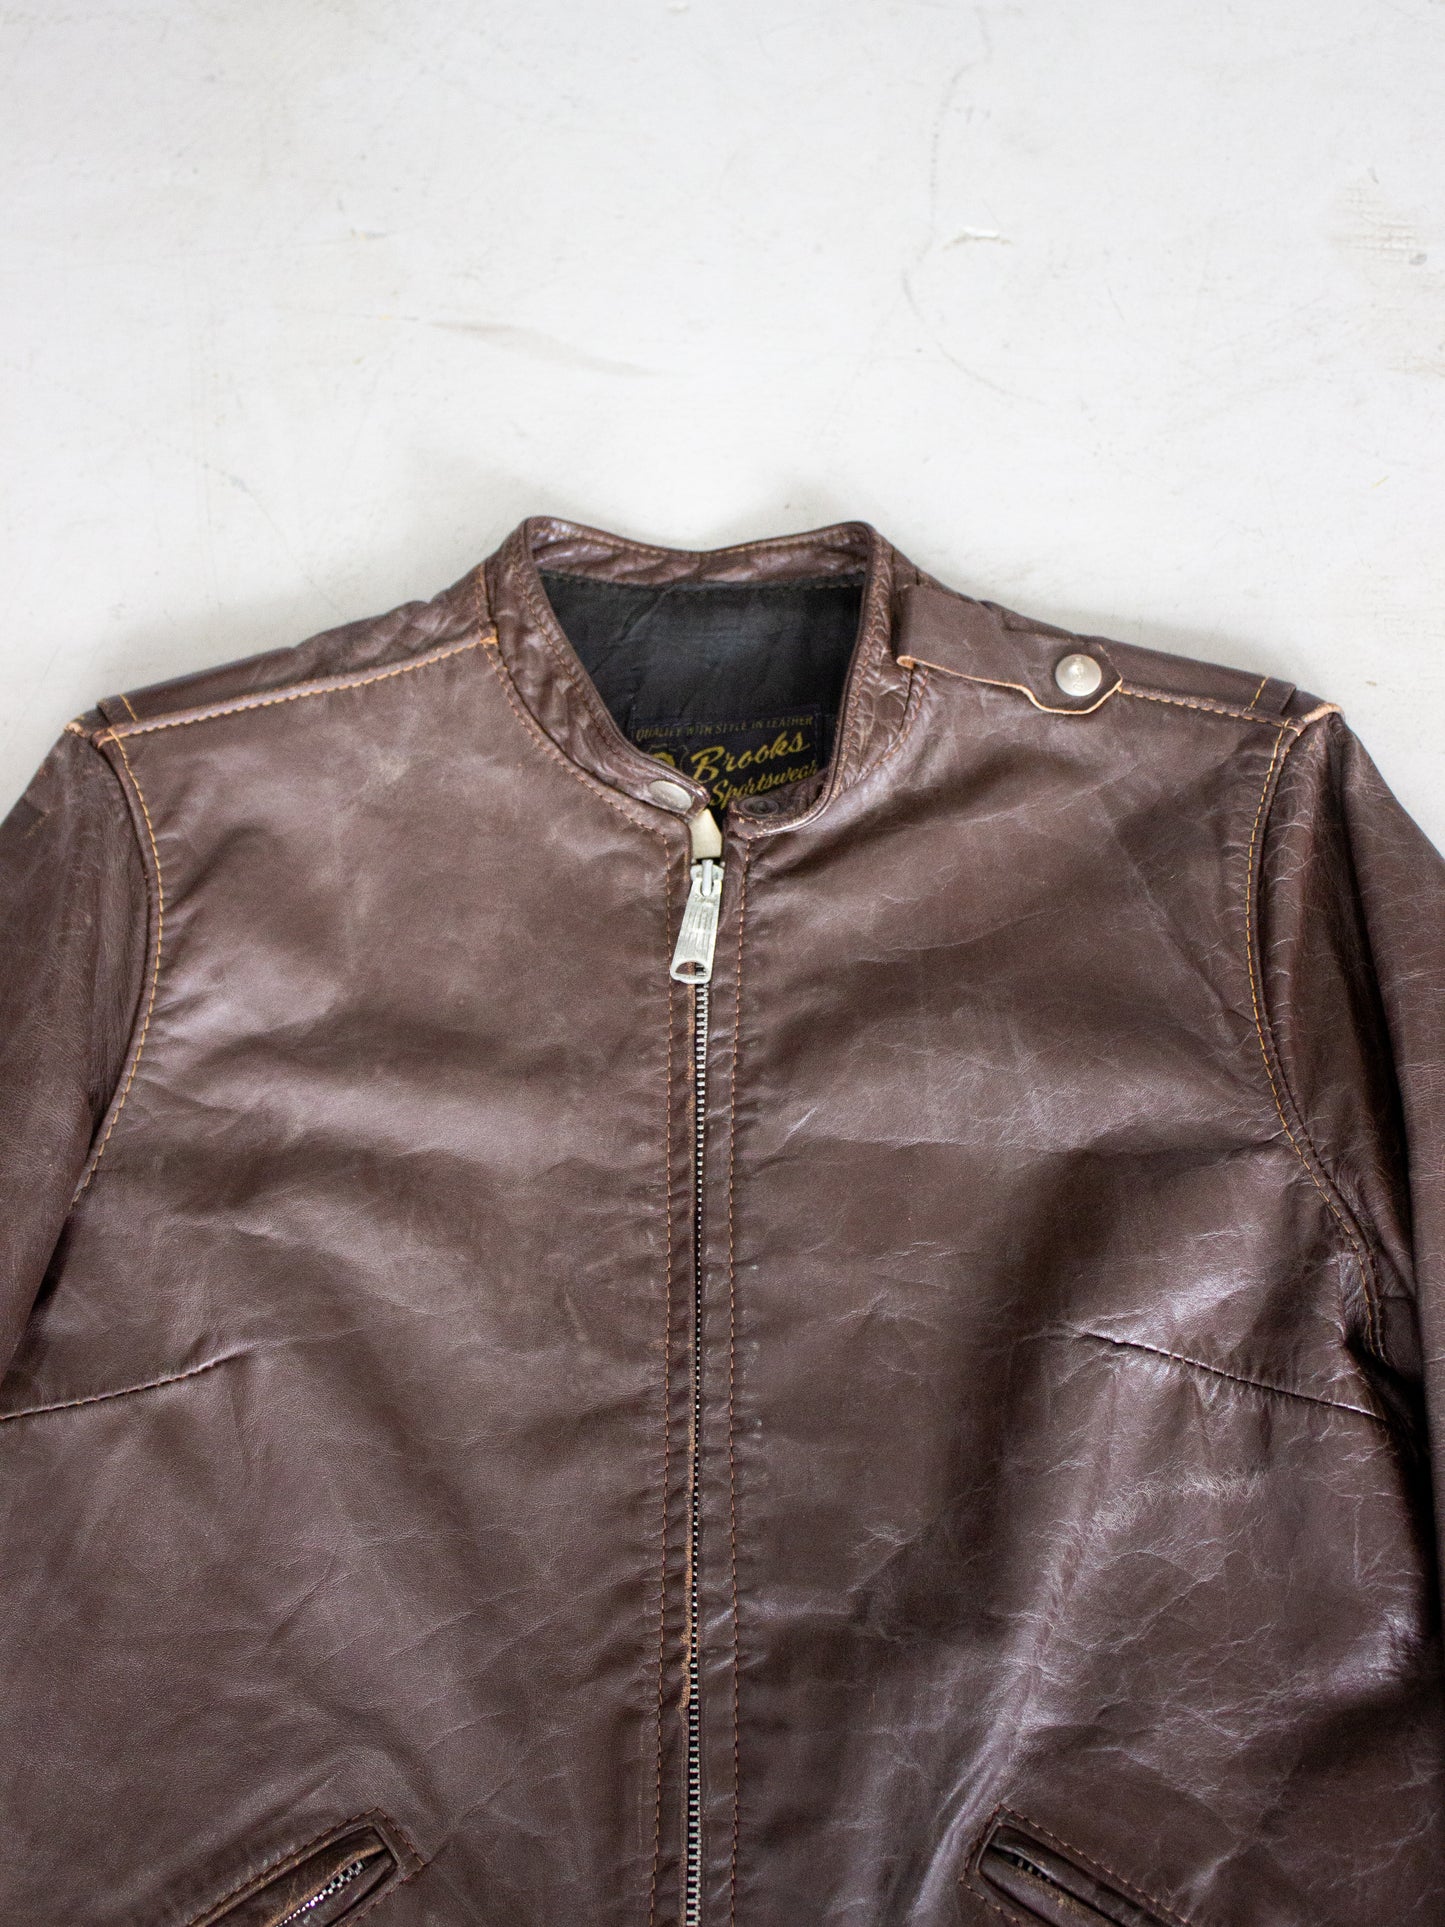 1960's Brooks Brown Leather Cafe Racer Motorcycle Jacket Made in USA Talon Zippers (Small)